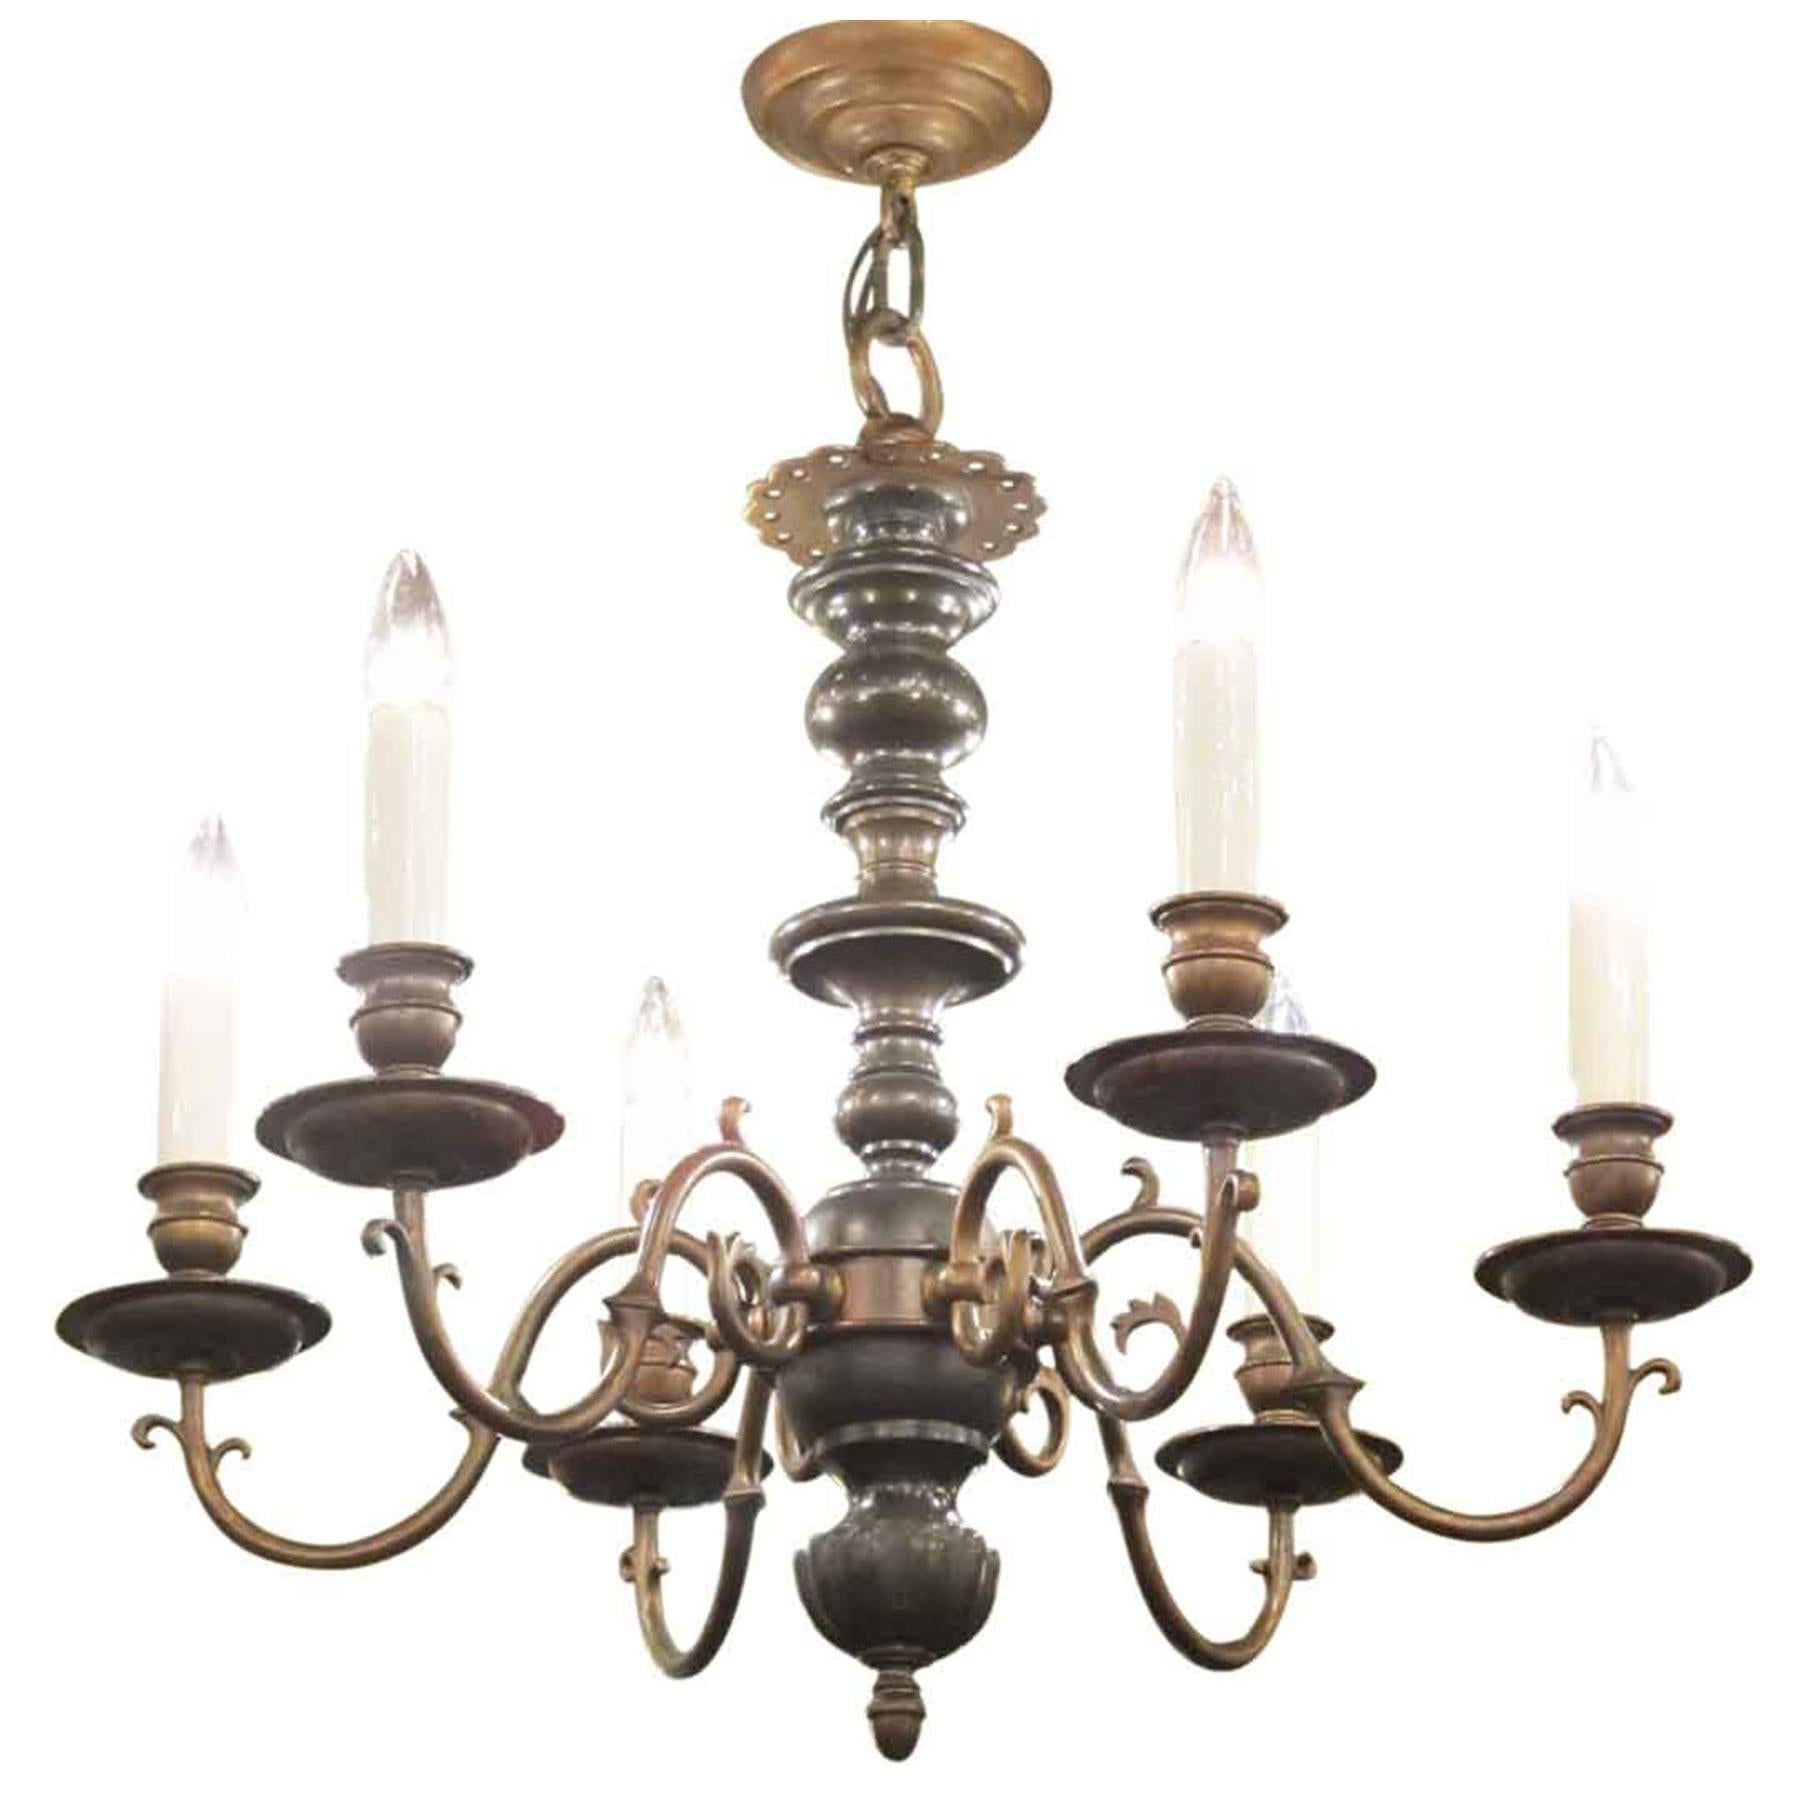 1930s Six-Light Chandelier with Oil Rubbed Bronze Finish